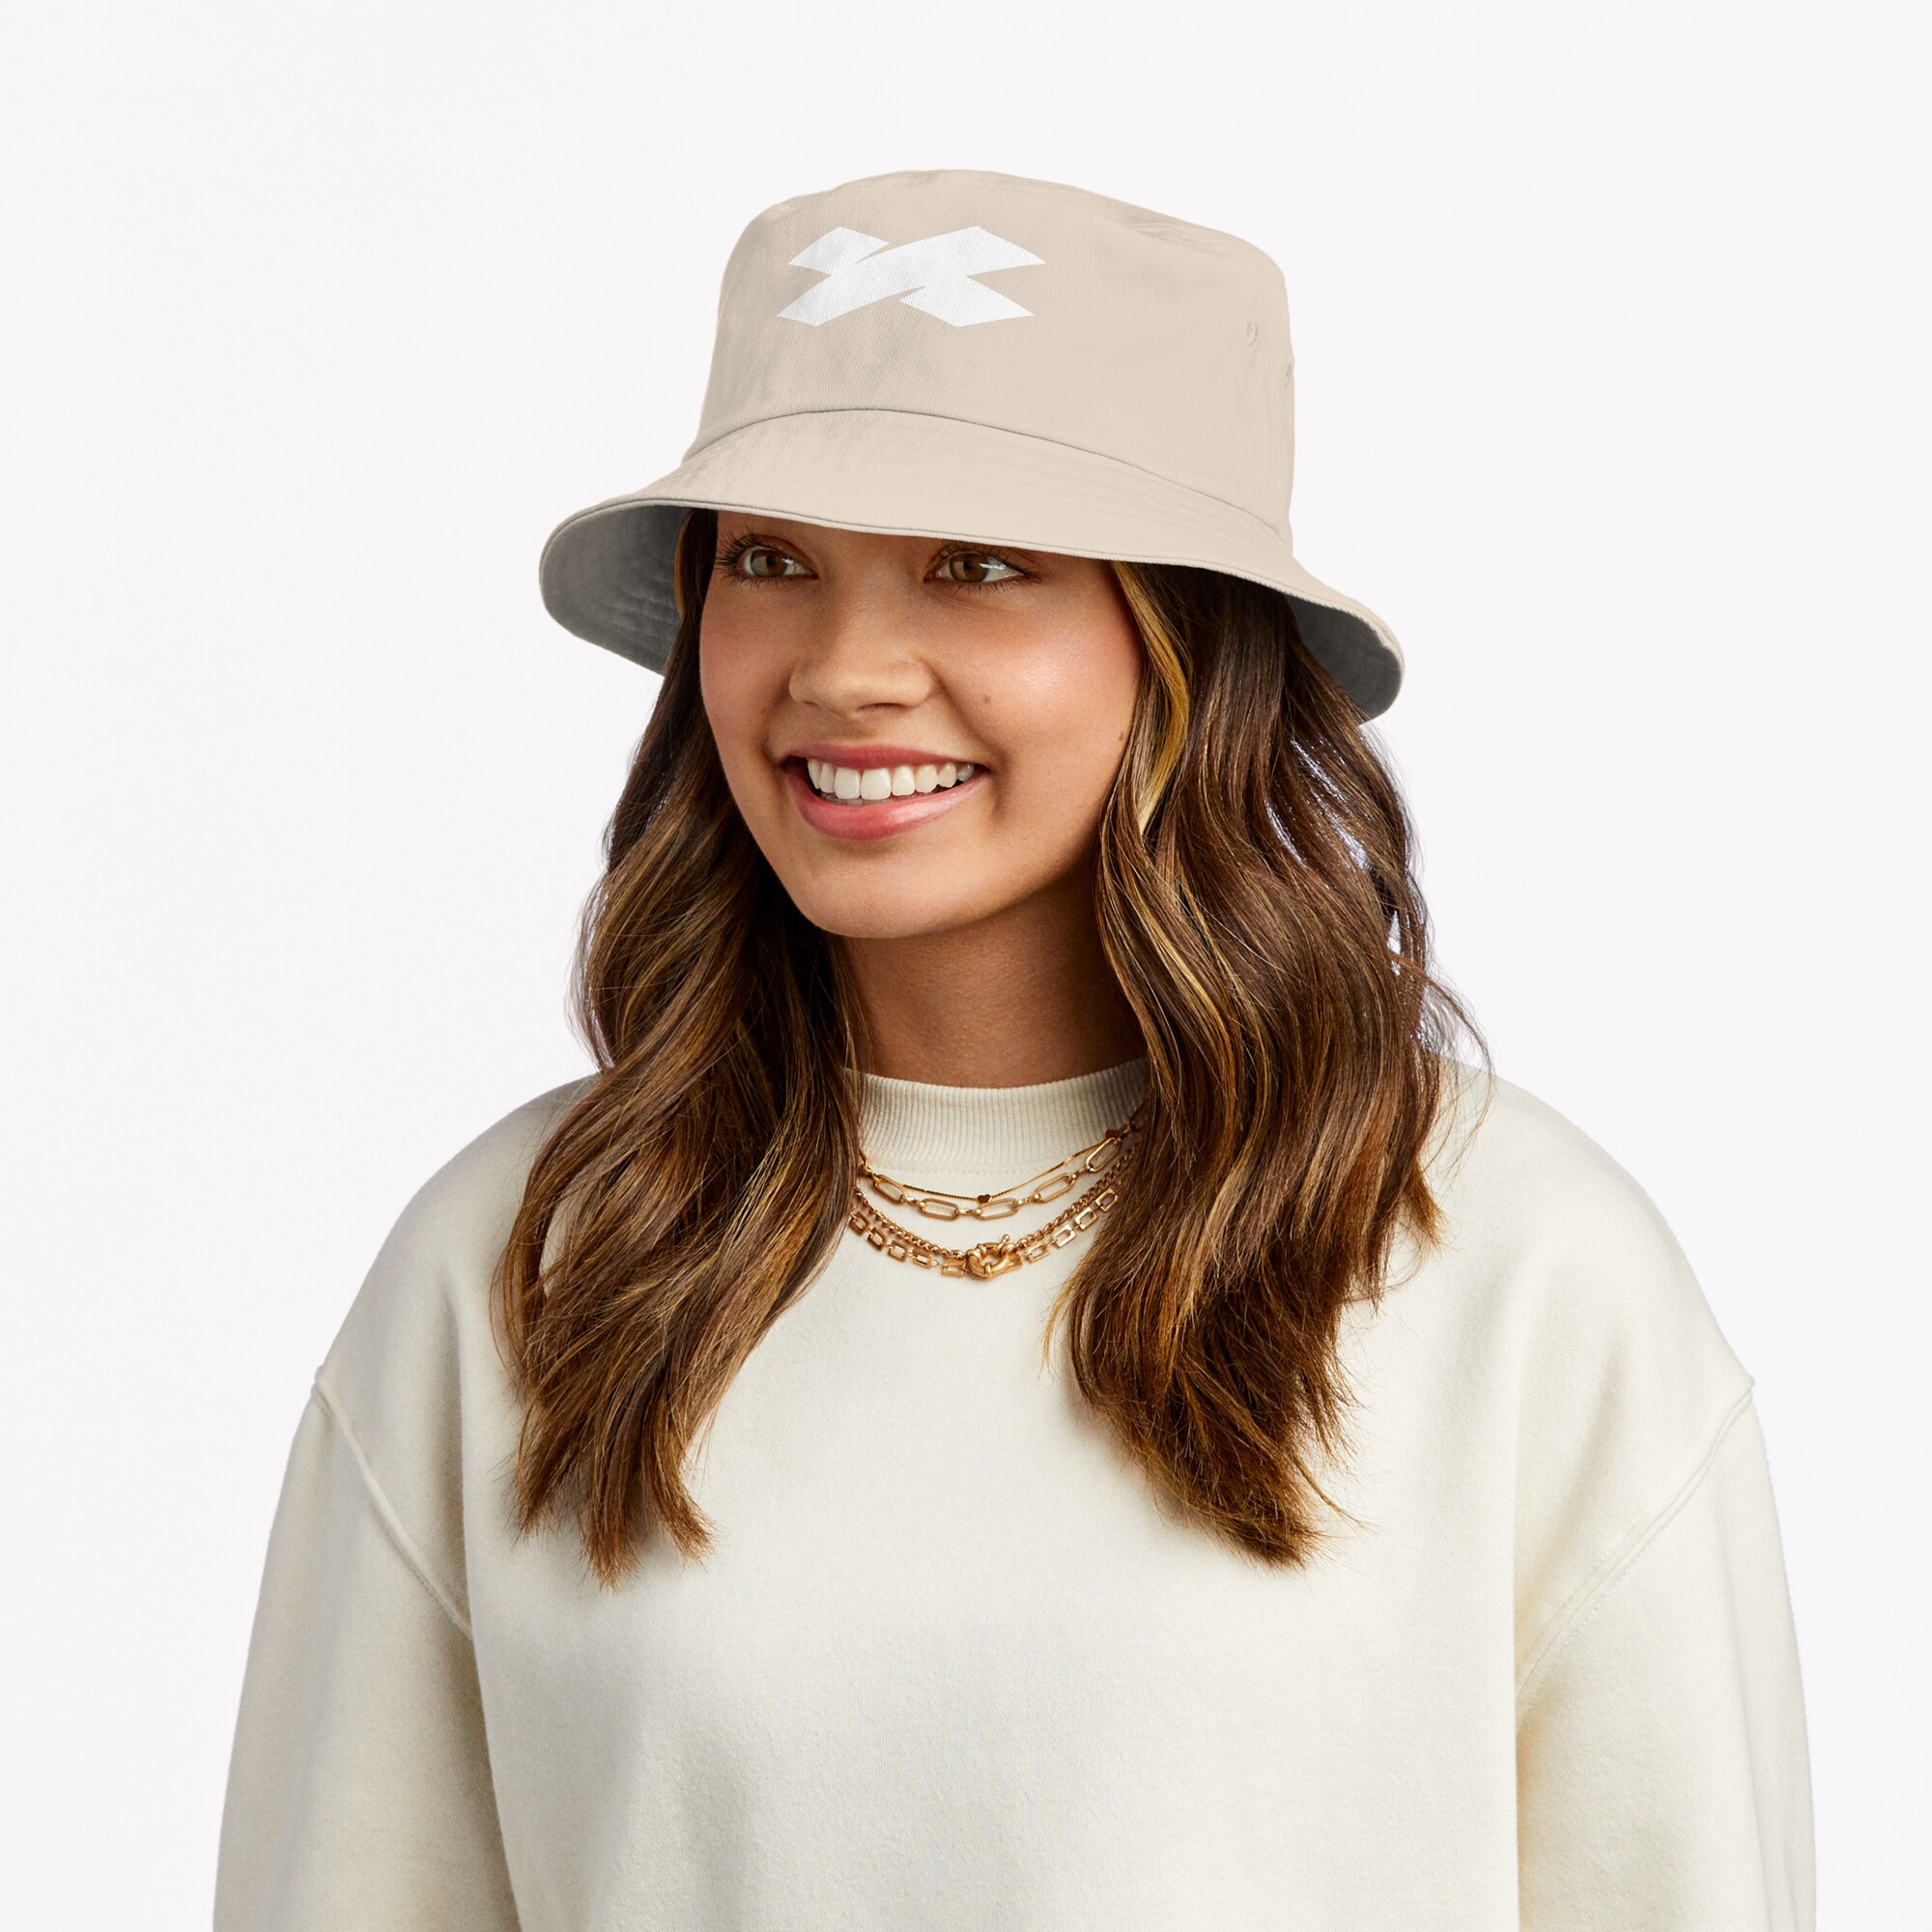 ssrcobucket hatwomense5d6c5f62bbf65eefrontsquare2000x2000 bgf8f8f8 - Sam And Colby Shop